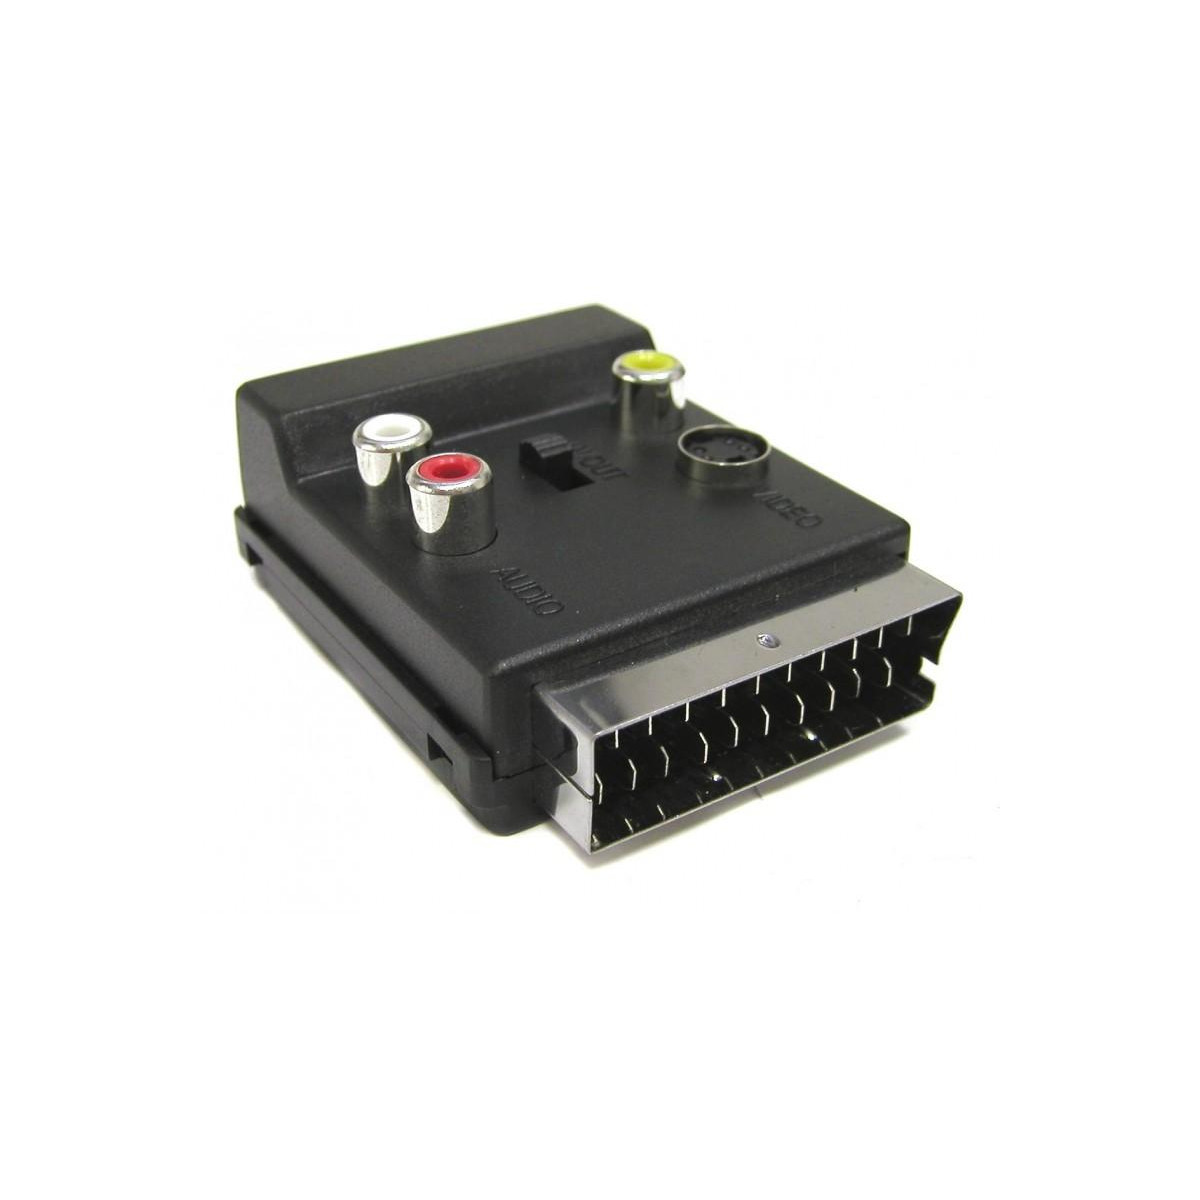 More about Redukce SCART - 3xCINCH - SVIDEO V70SL